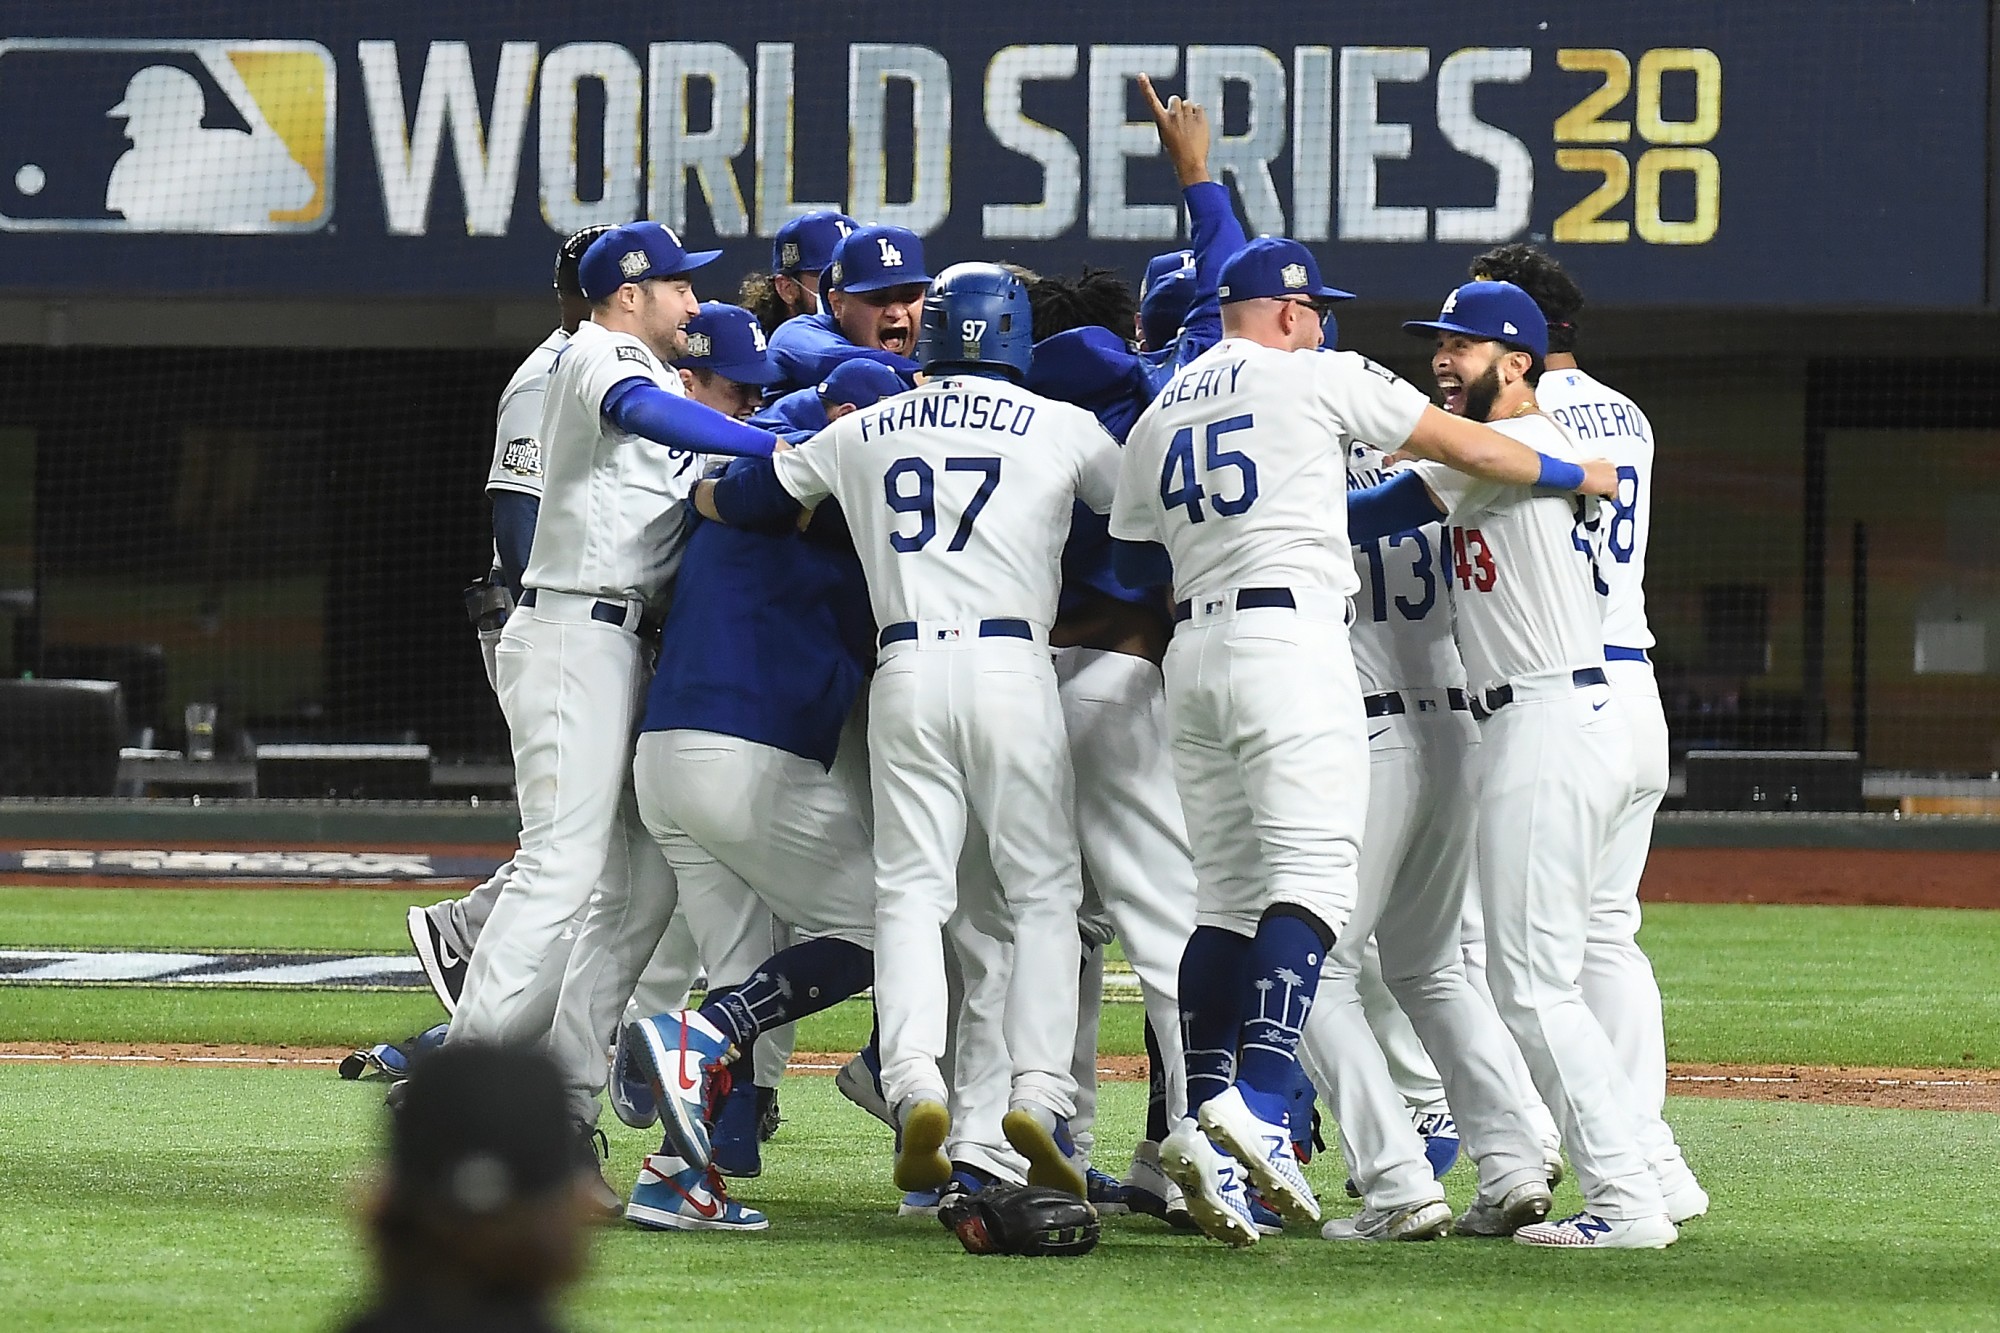 A group of Dodgers' players celebrate after winning a World Series title.